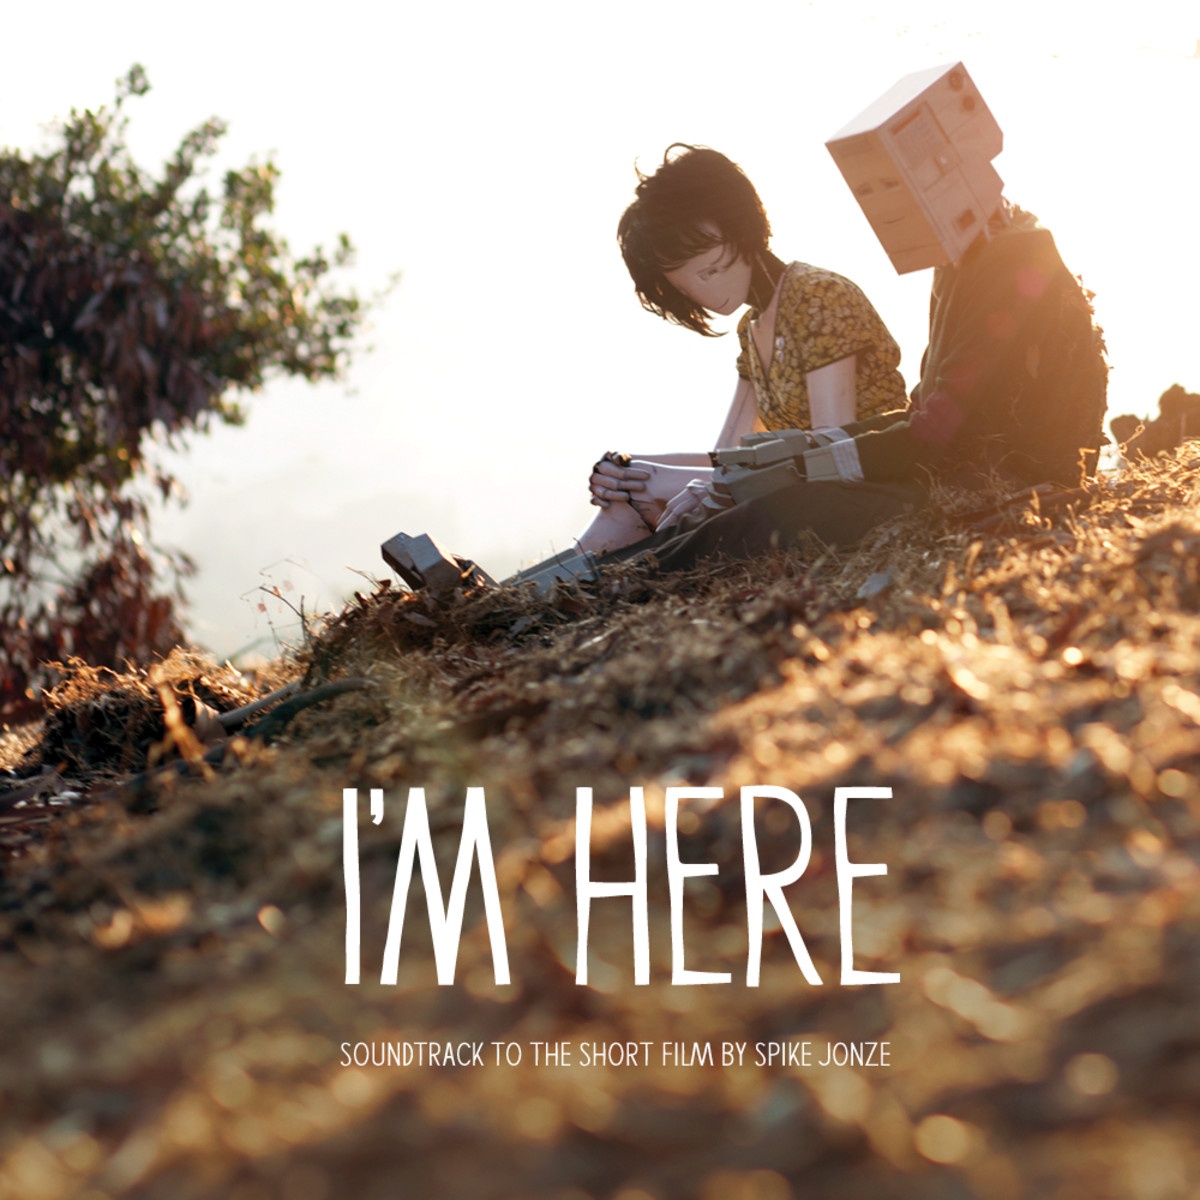 I'm Here (Soundtrack to The Short Film by Spike Jonze)